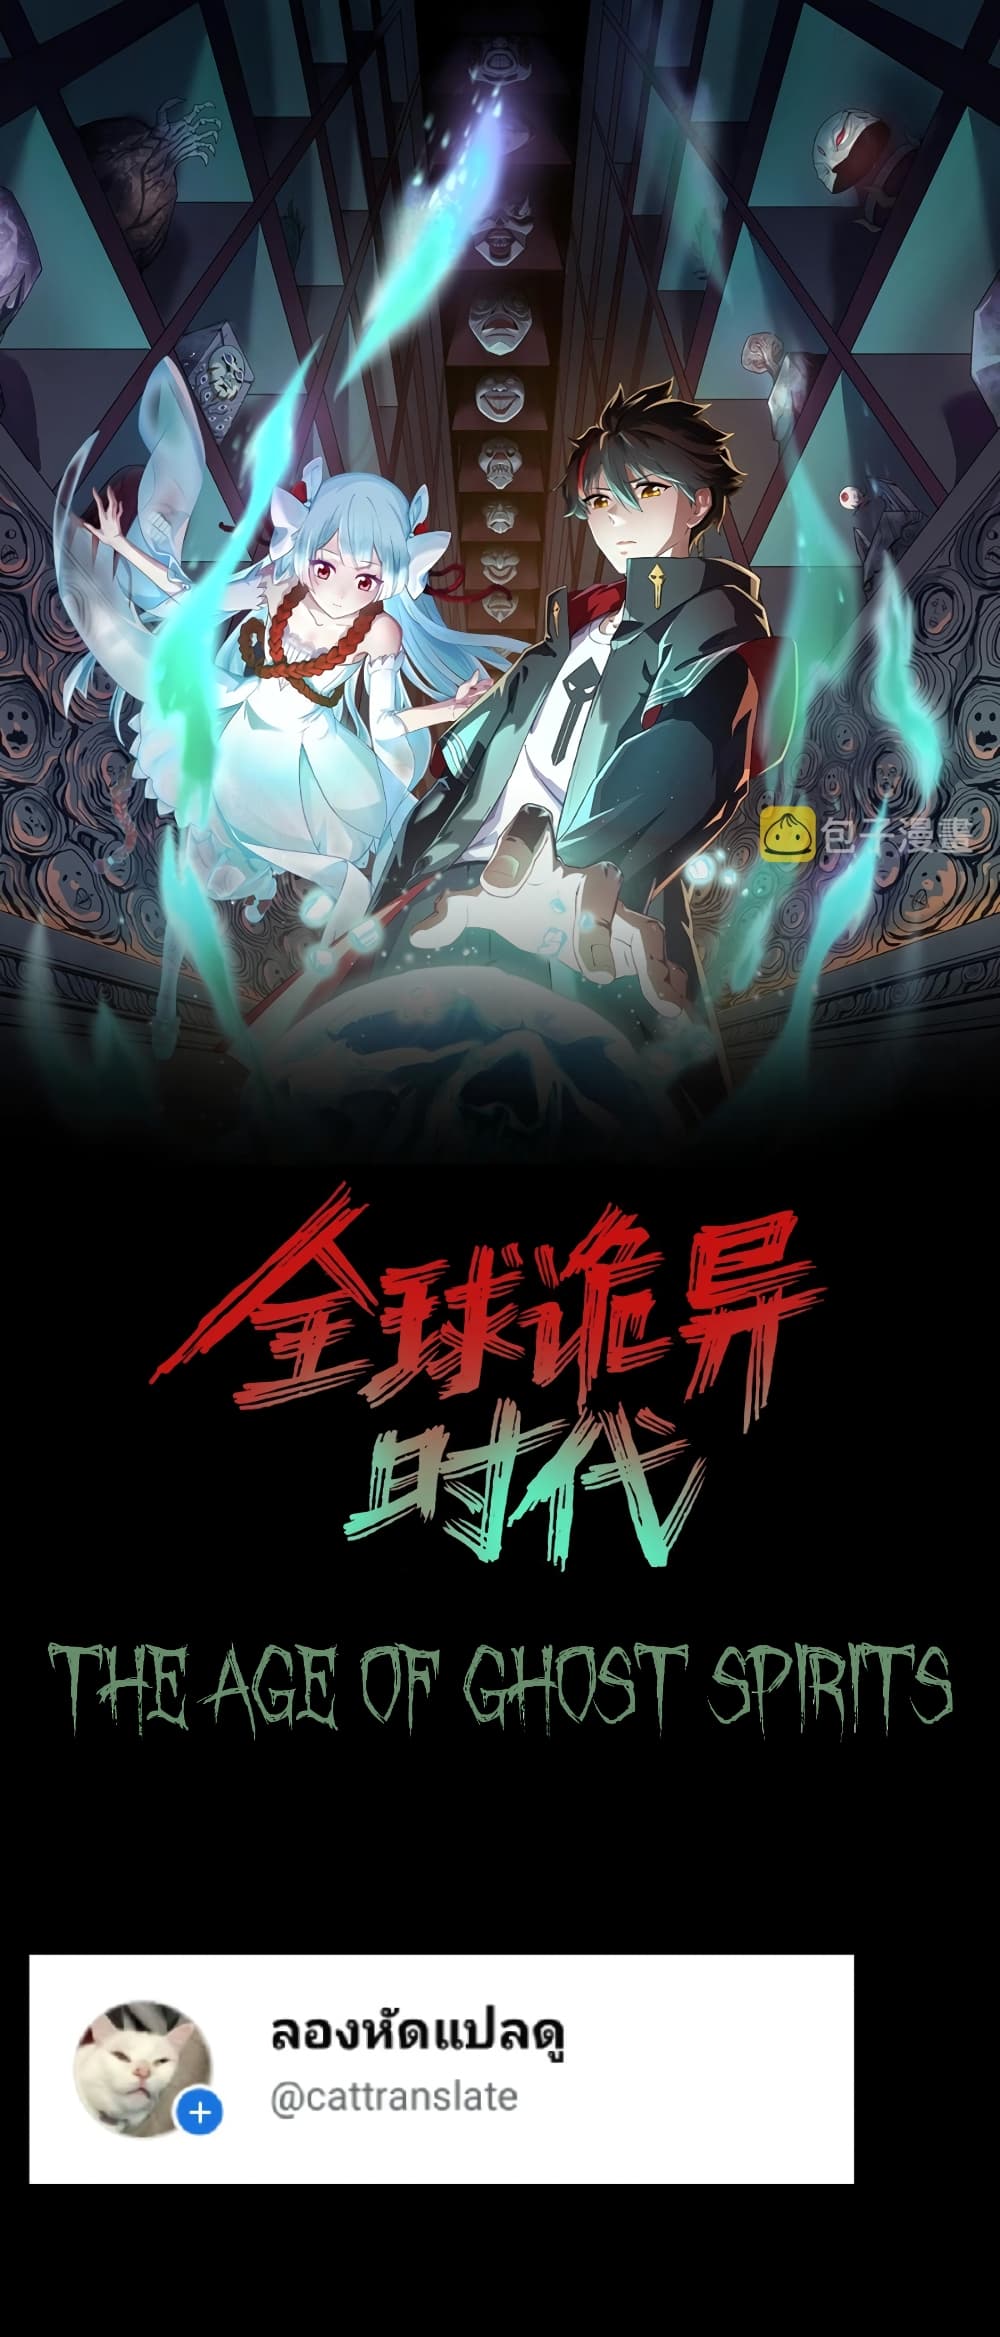 The Age of Ghost Spirits à¸à¸­à¸à¸à¸µà¹ 35 (1)